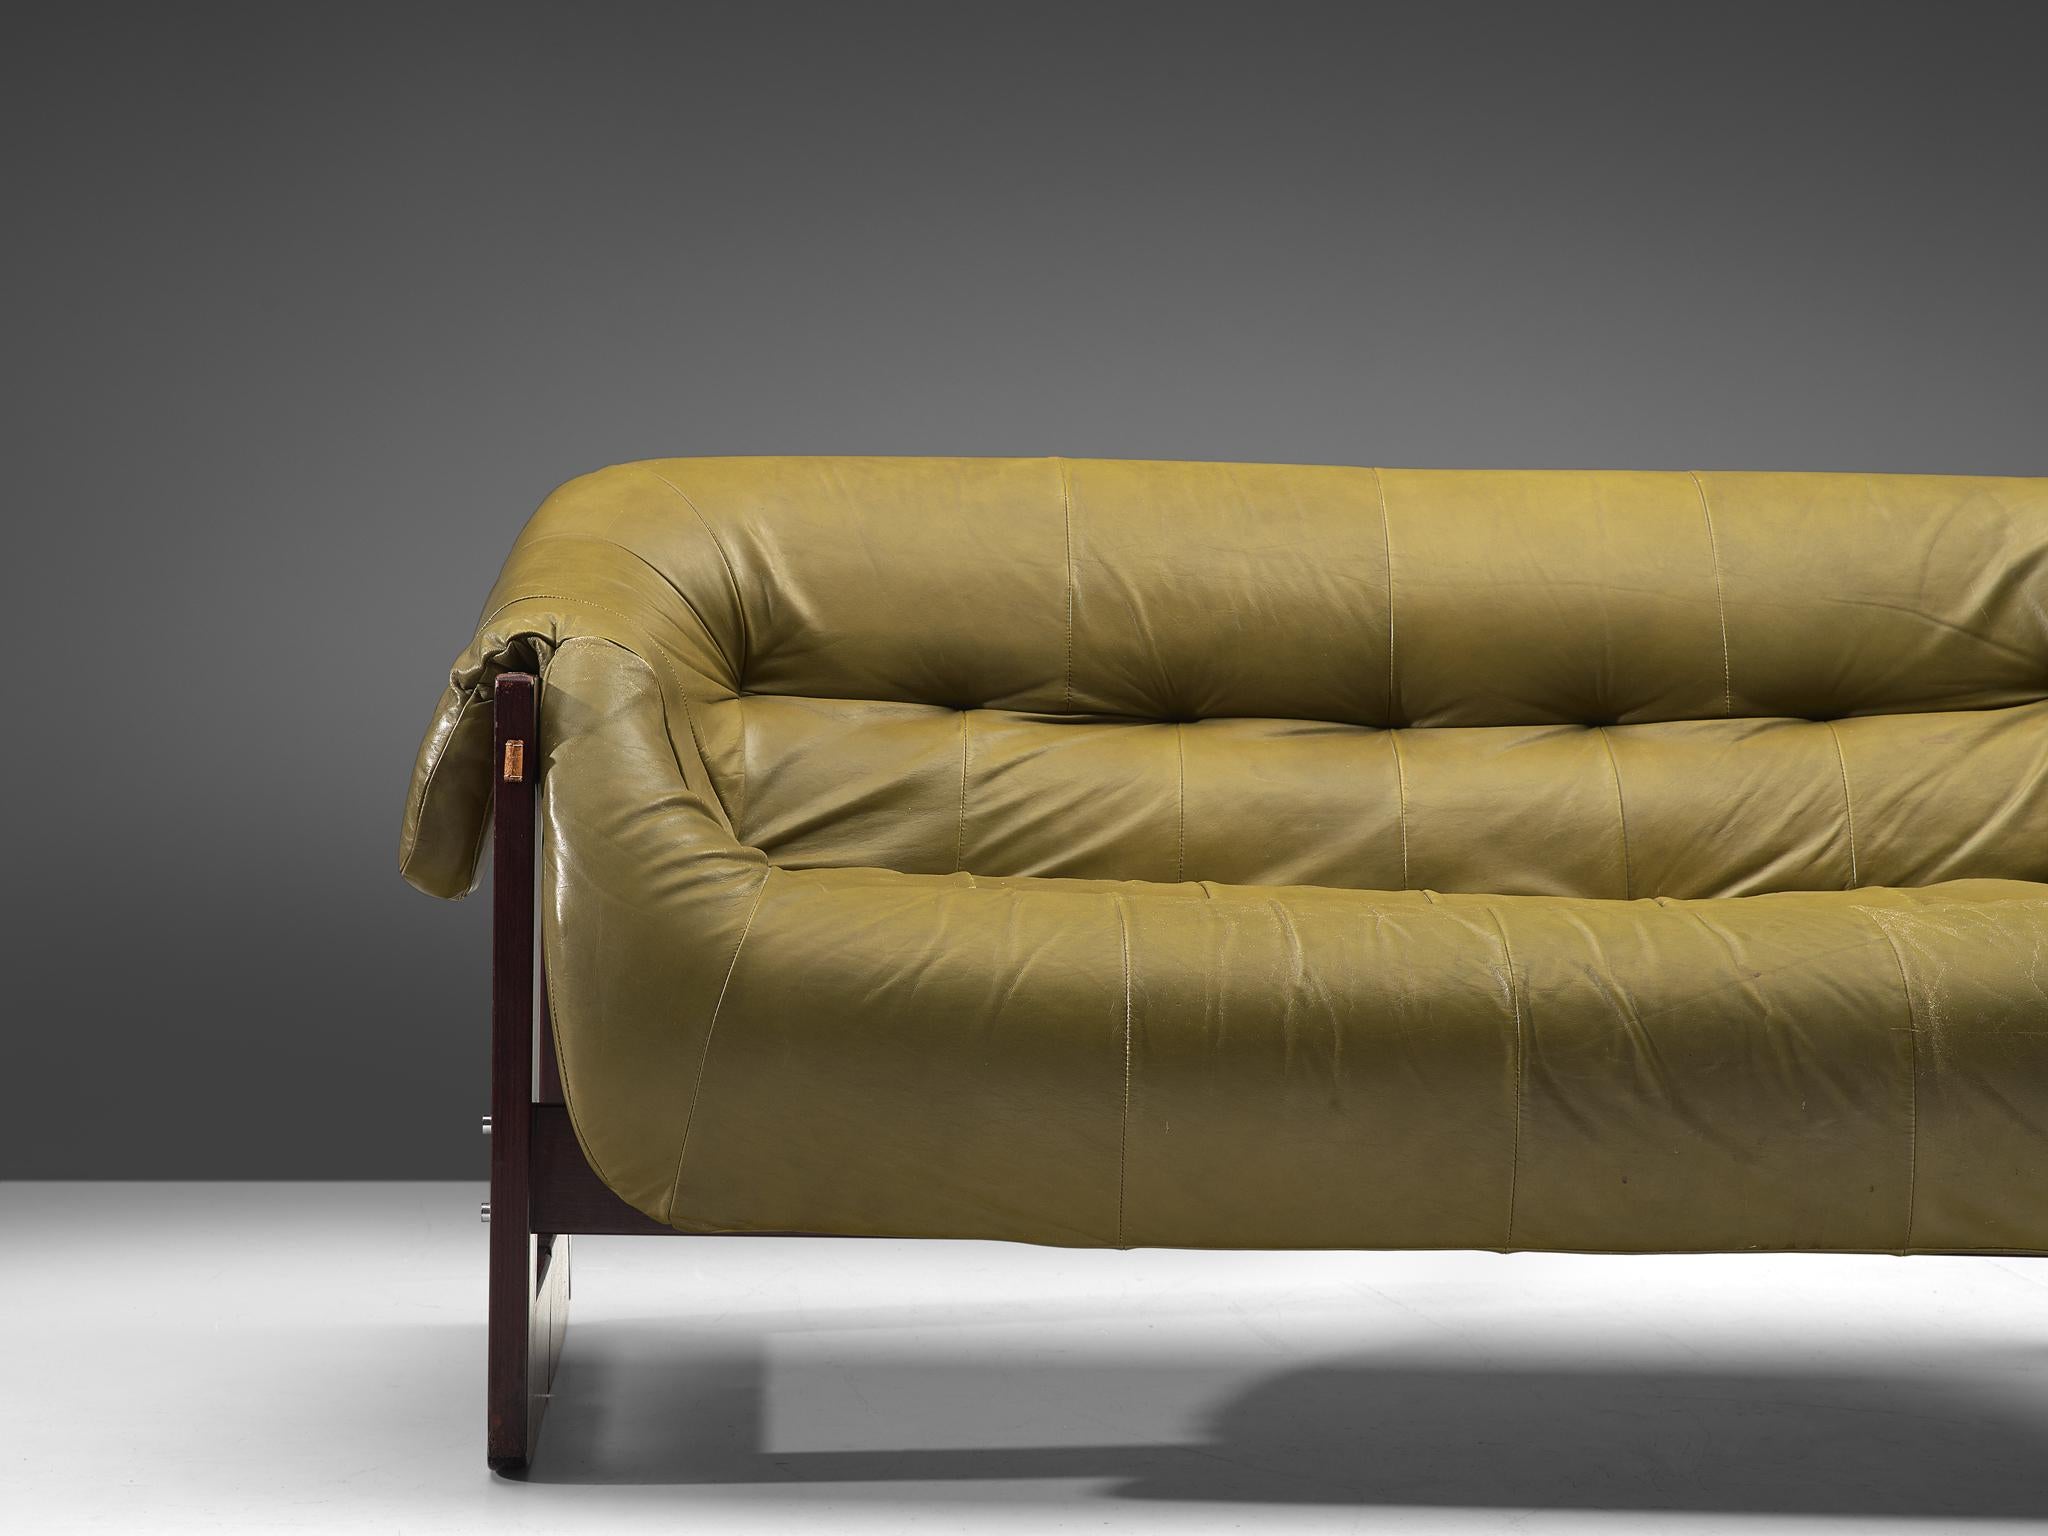 Spanish Percival Lafer Sofa in Moss Green Leather